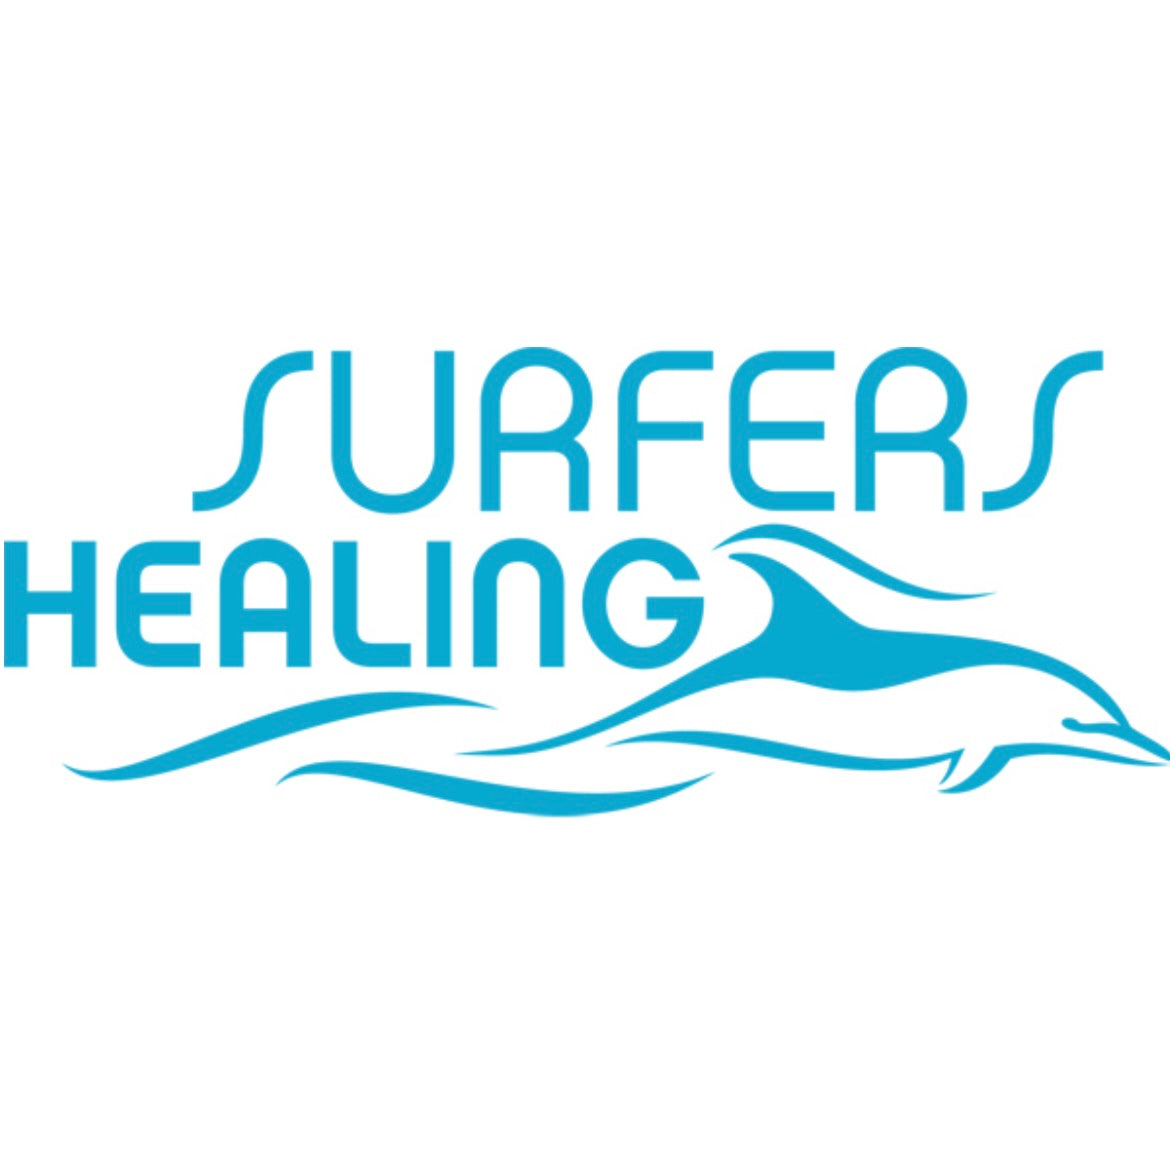 One Perfect Day Cuff for Surfer's Healing